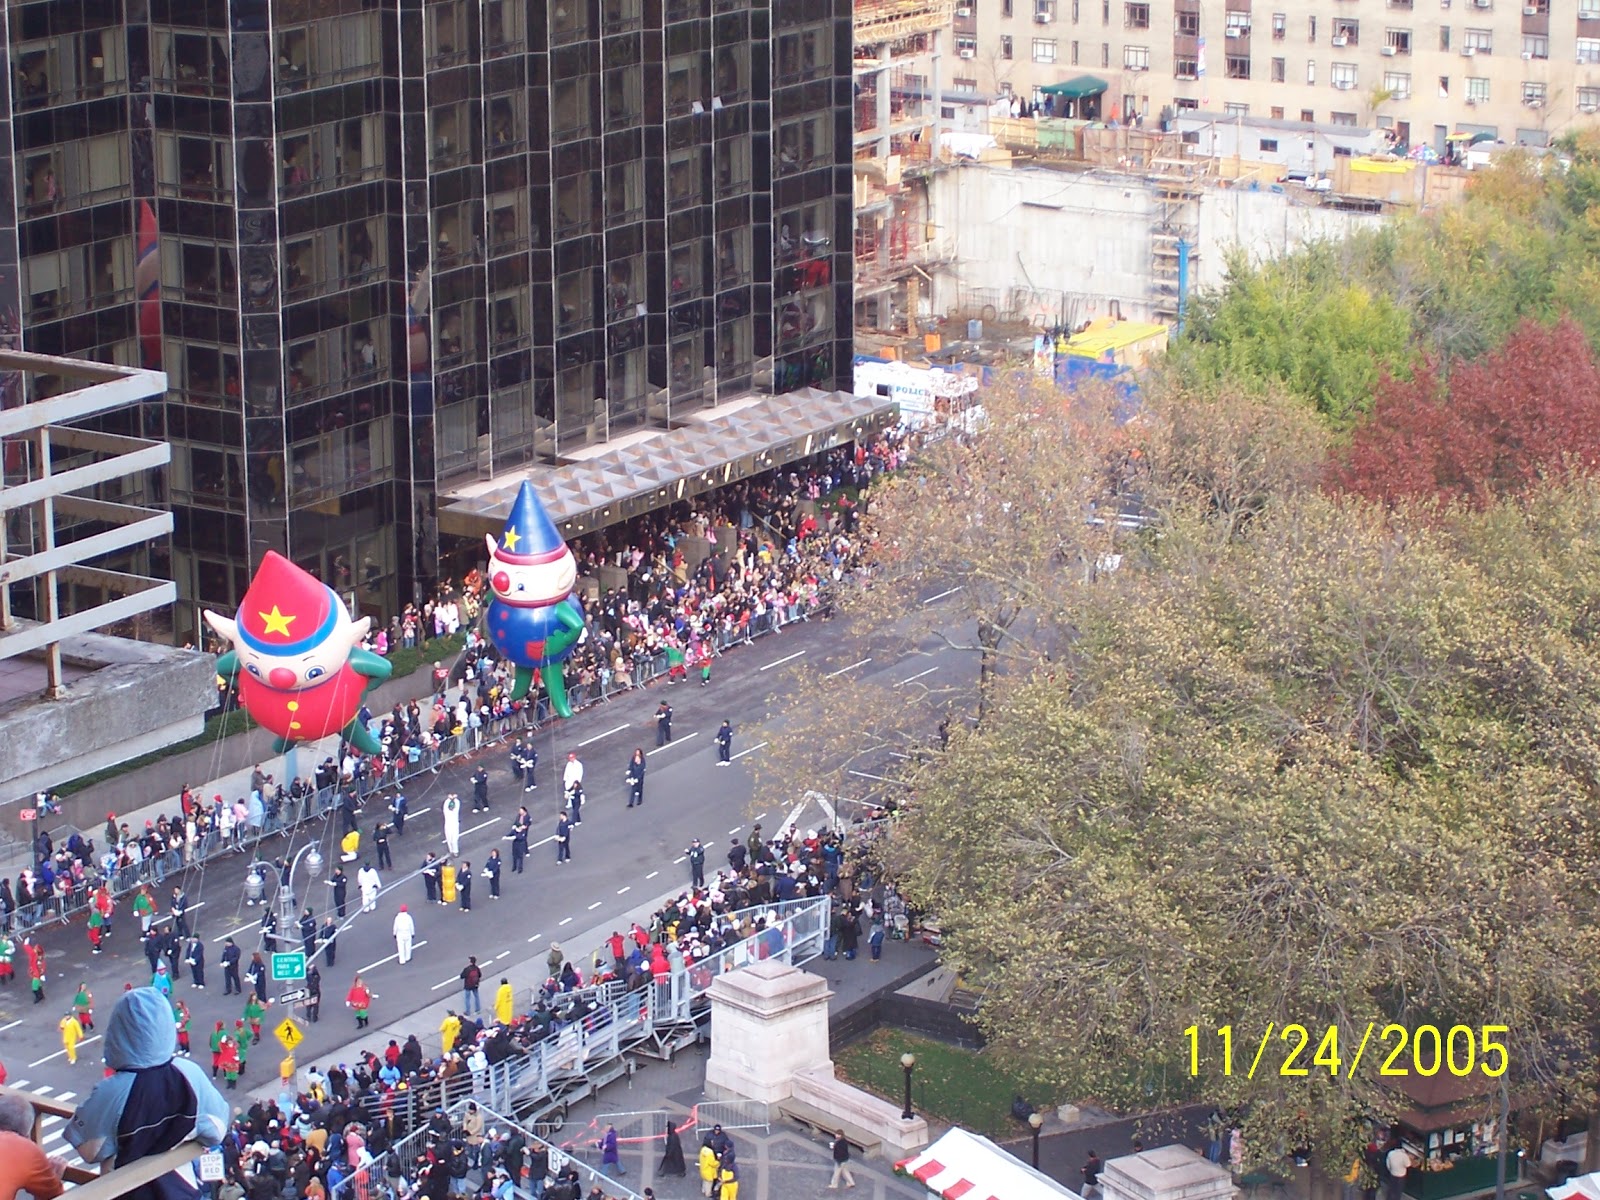 Balloons of Red and Blue Elves, Macy's Thanksgiving Day Parade 2005